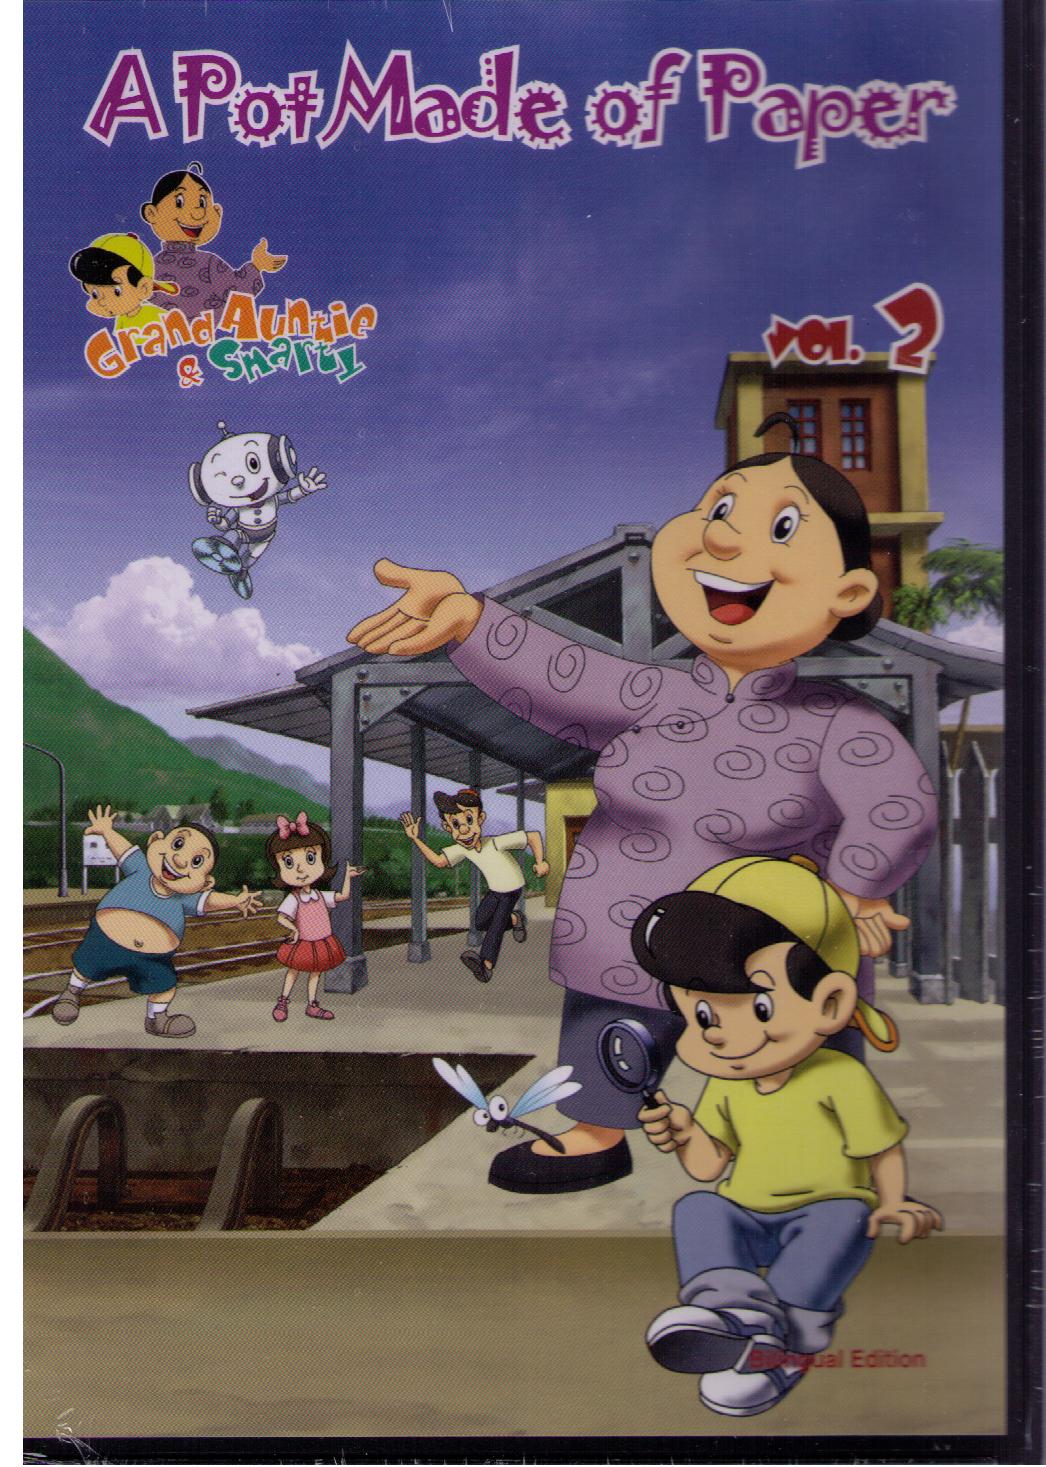 Grand Auntie And Smarty Vol 2: A Pot Made of Paper (Bilingual DVD Chinese-English) 大嬸婆與小聰明